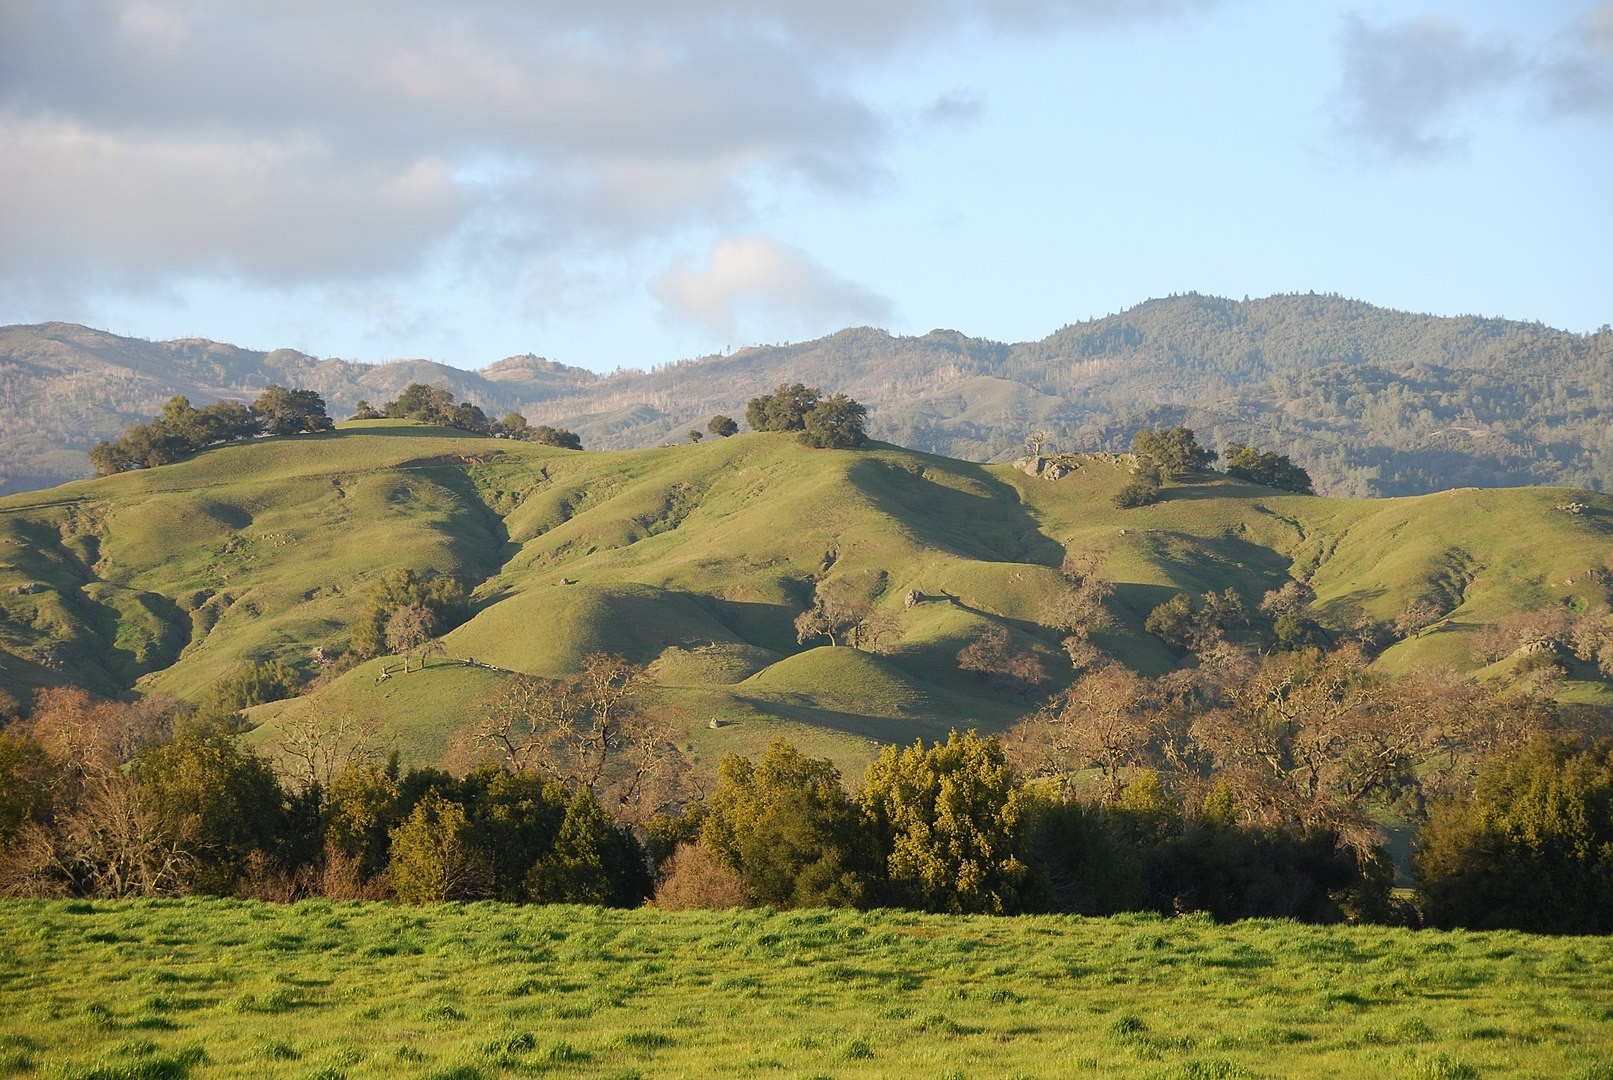 By nigelpepper - Rolling hills of the Napa valley, CC BY 2.0, https://commons.wikimedia.org/w/index.php?curid=8378030